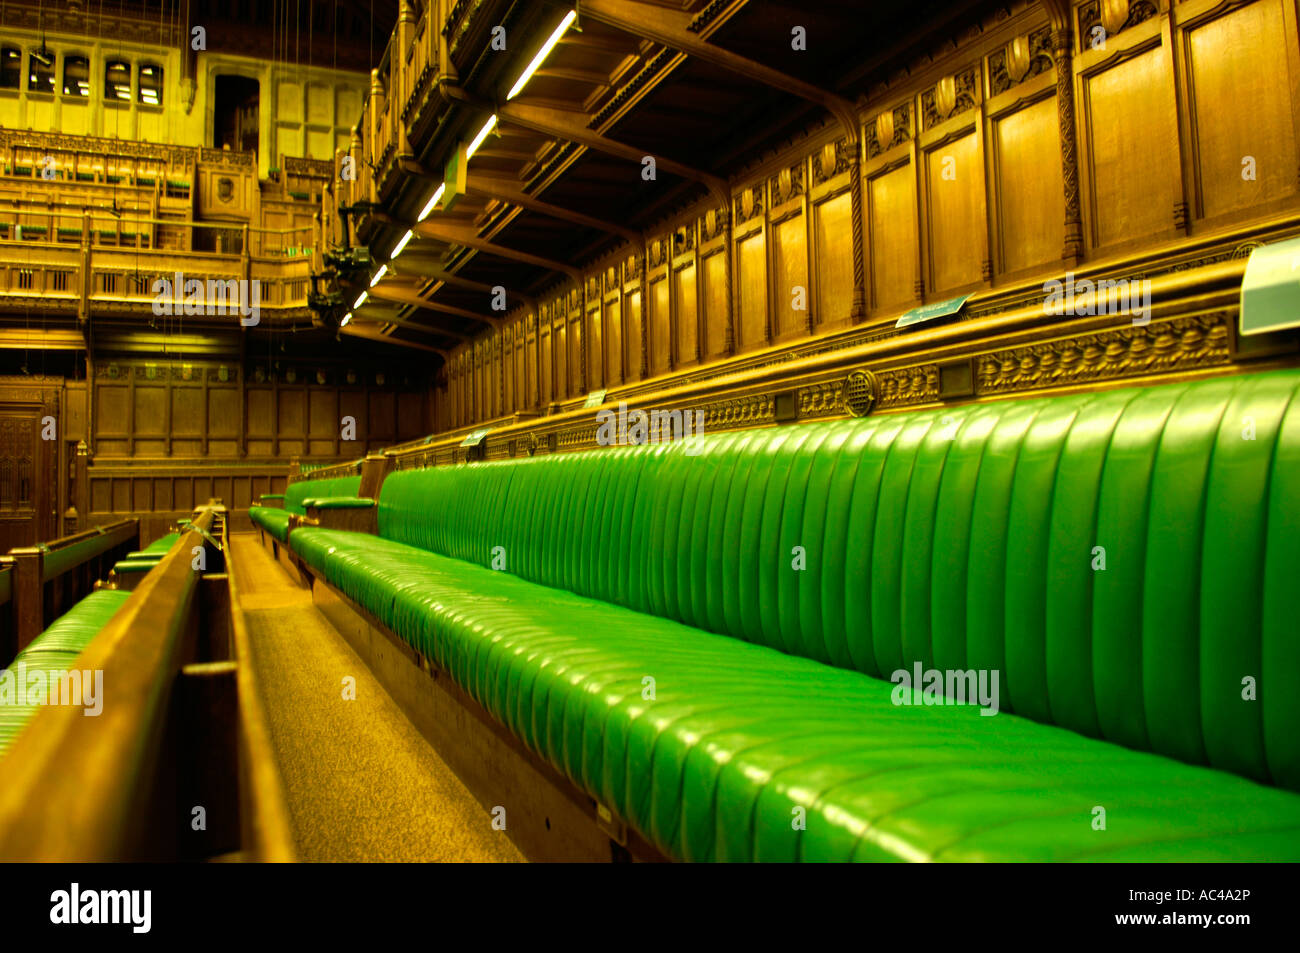 green-benches-leather-the-palace-of-west